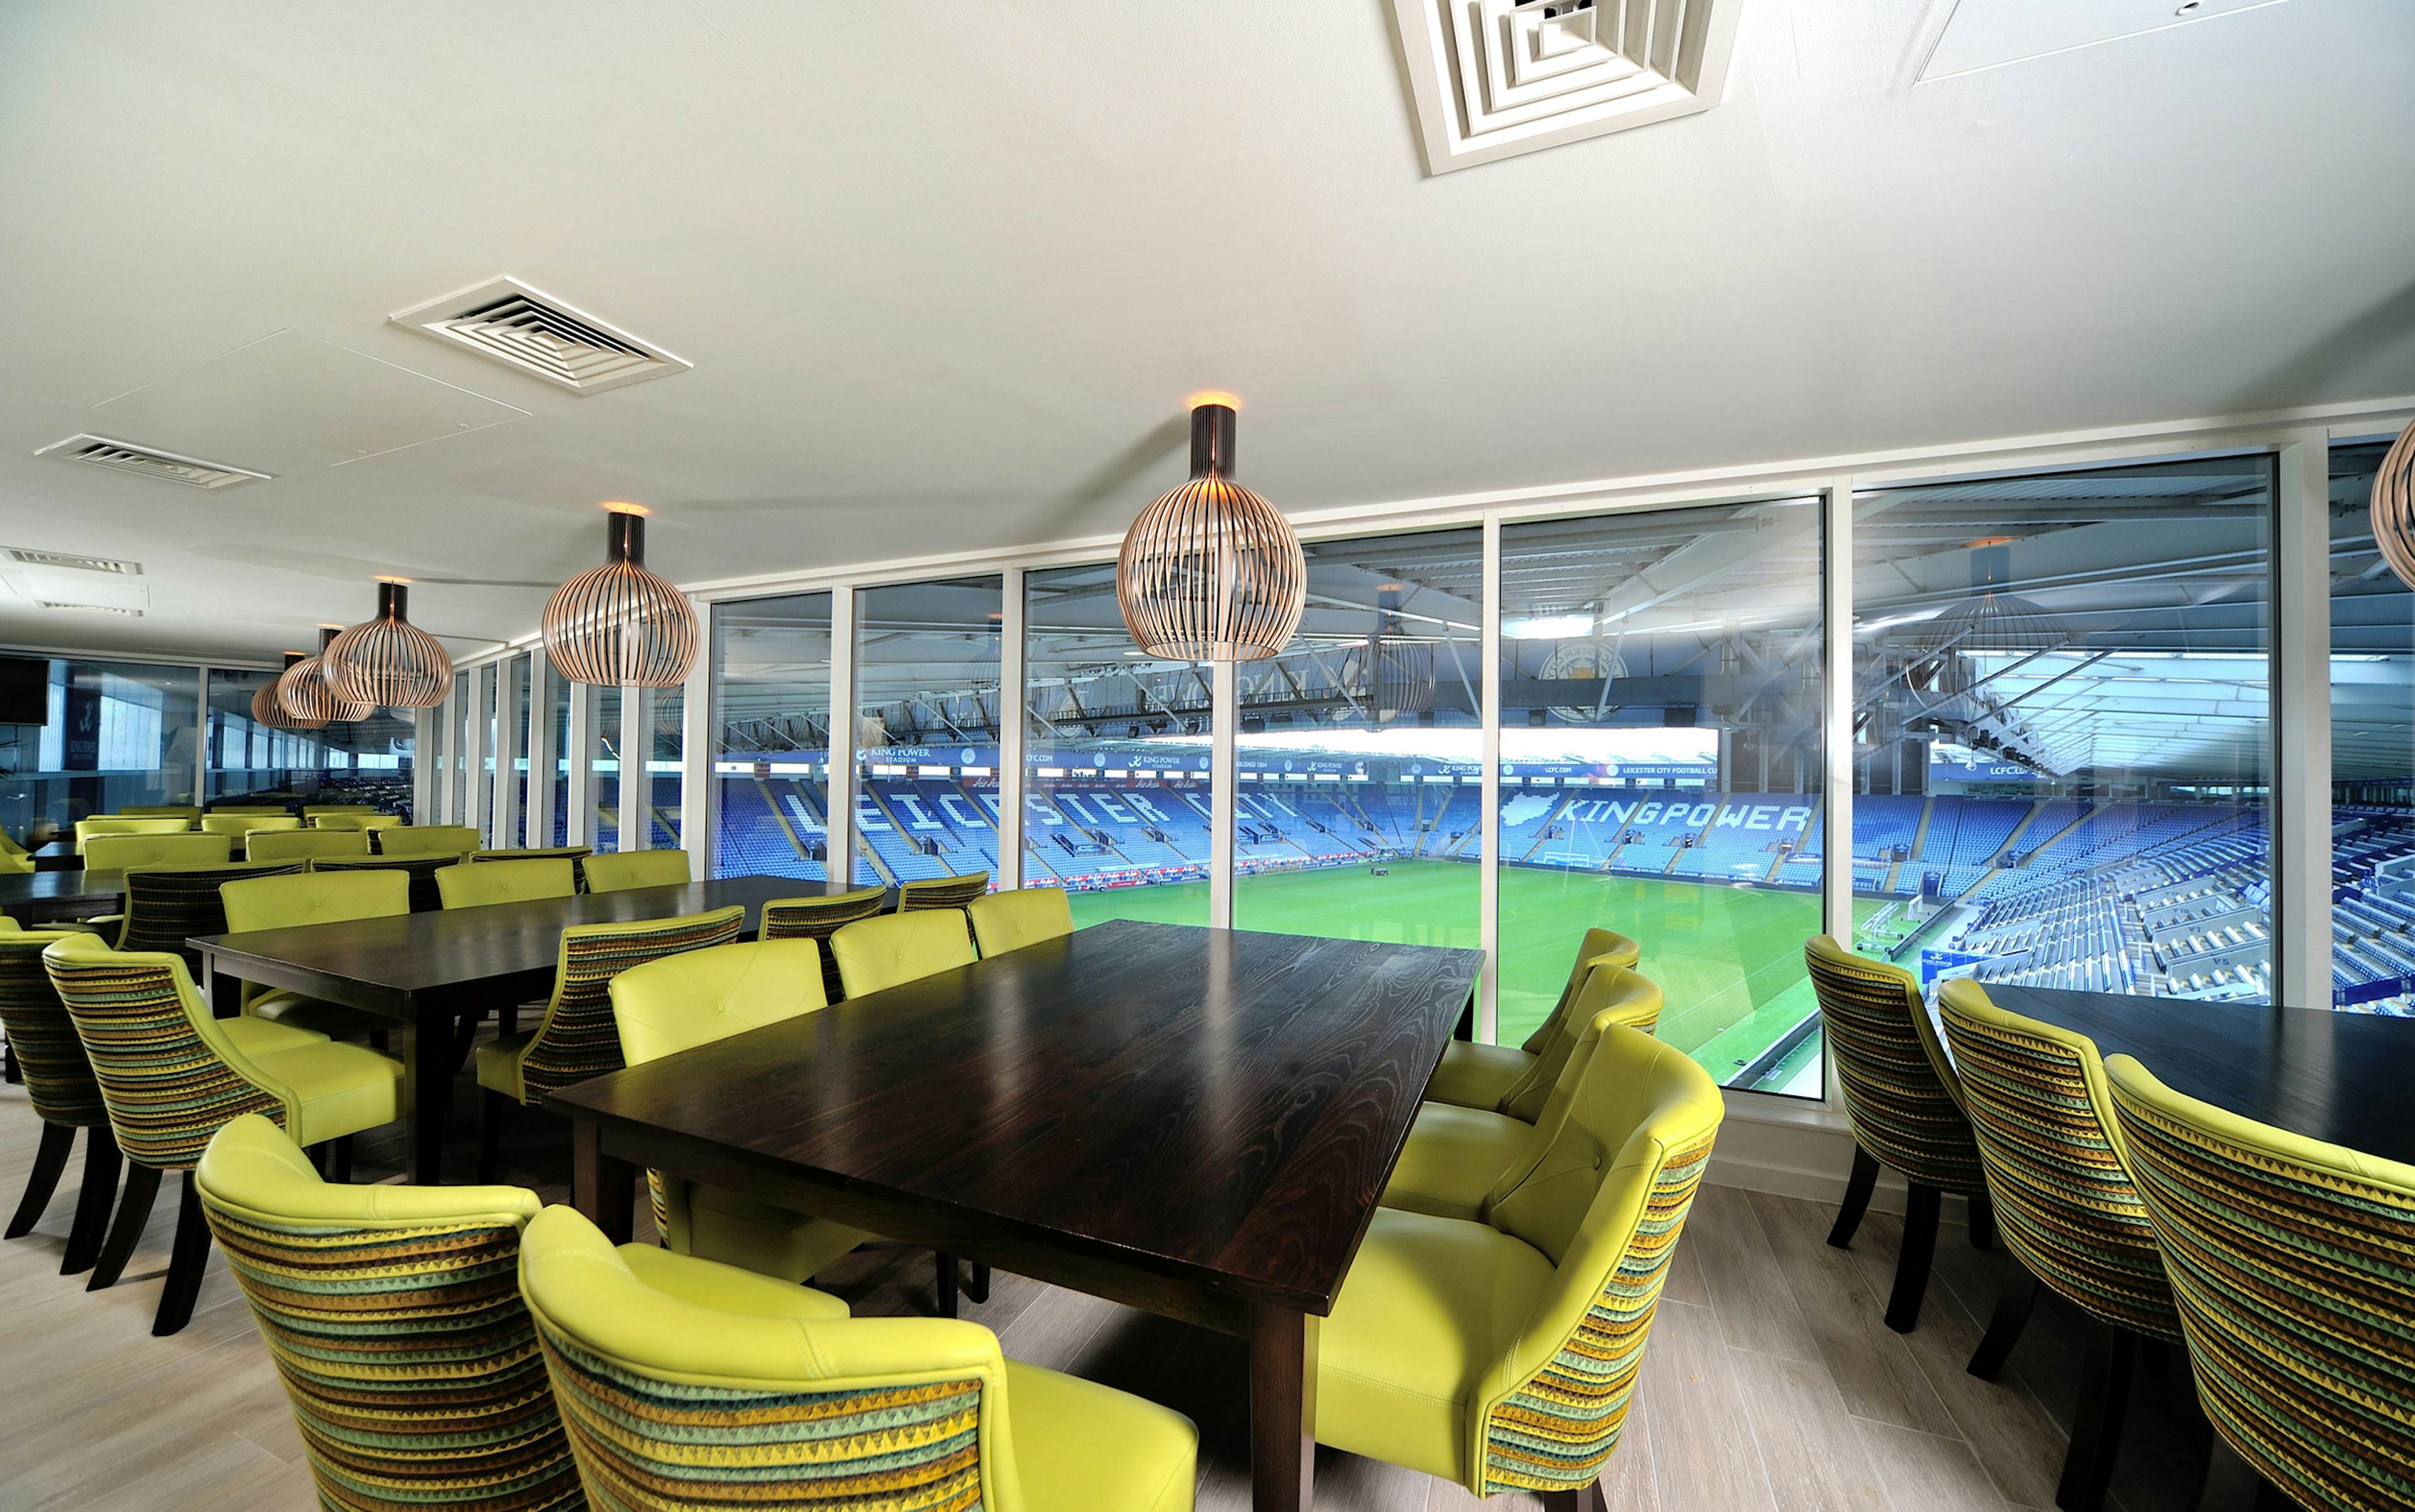 Leicester City Football Club - The Gallery image 1